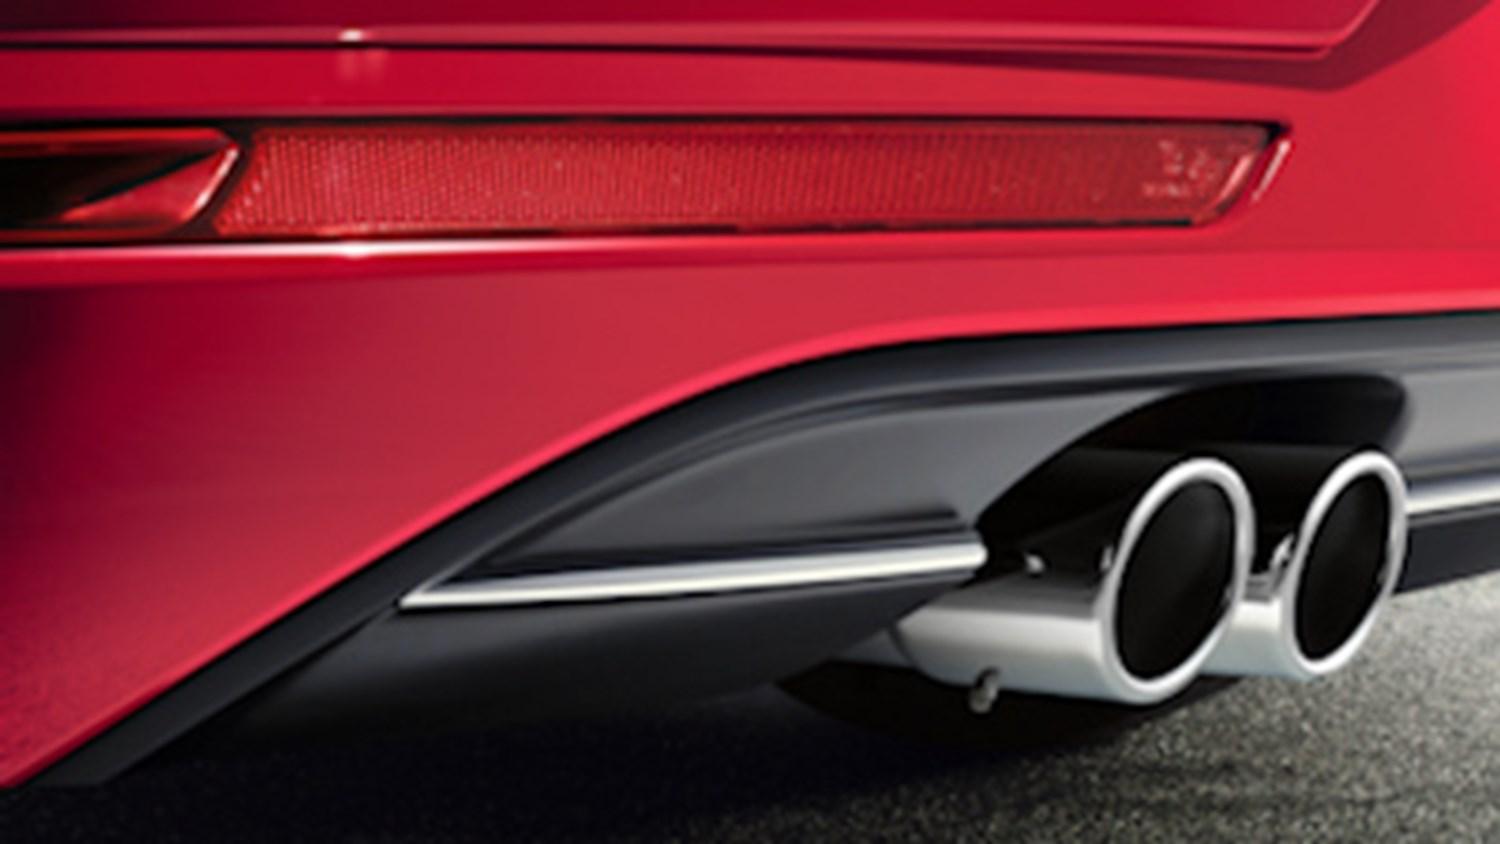 Exhaust of a red vehicle